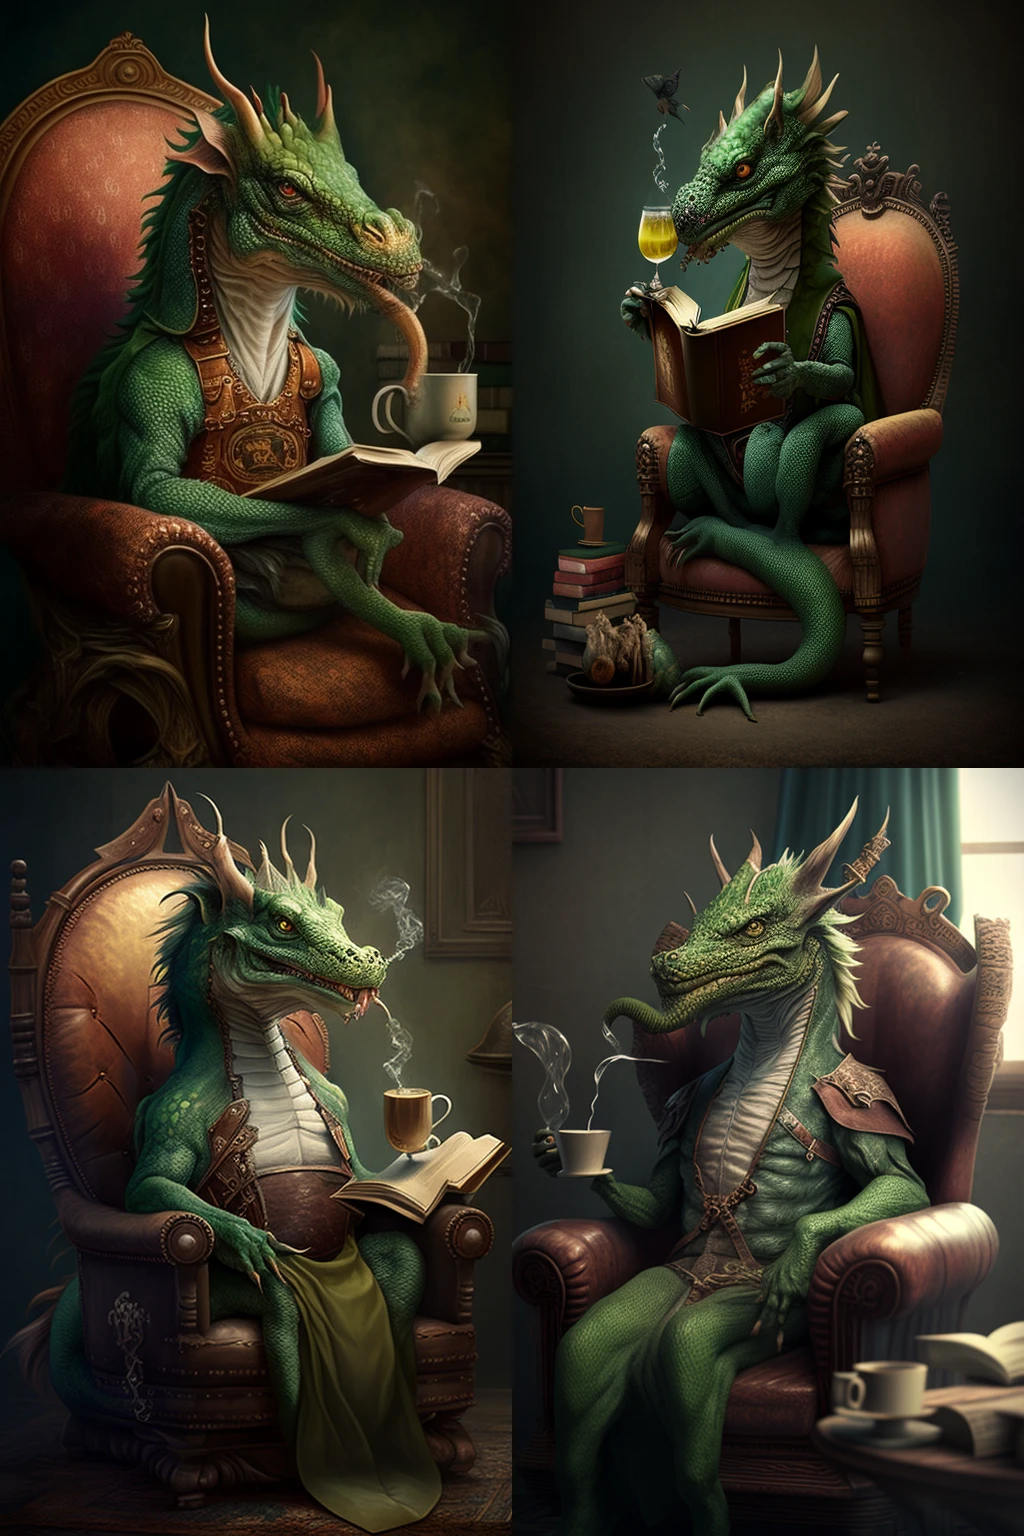 anna_hernandez_a_refined_green_chinese_dragon_is_reading_a_book_8c837af1-1c81-425c-808f-1909eeacb970